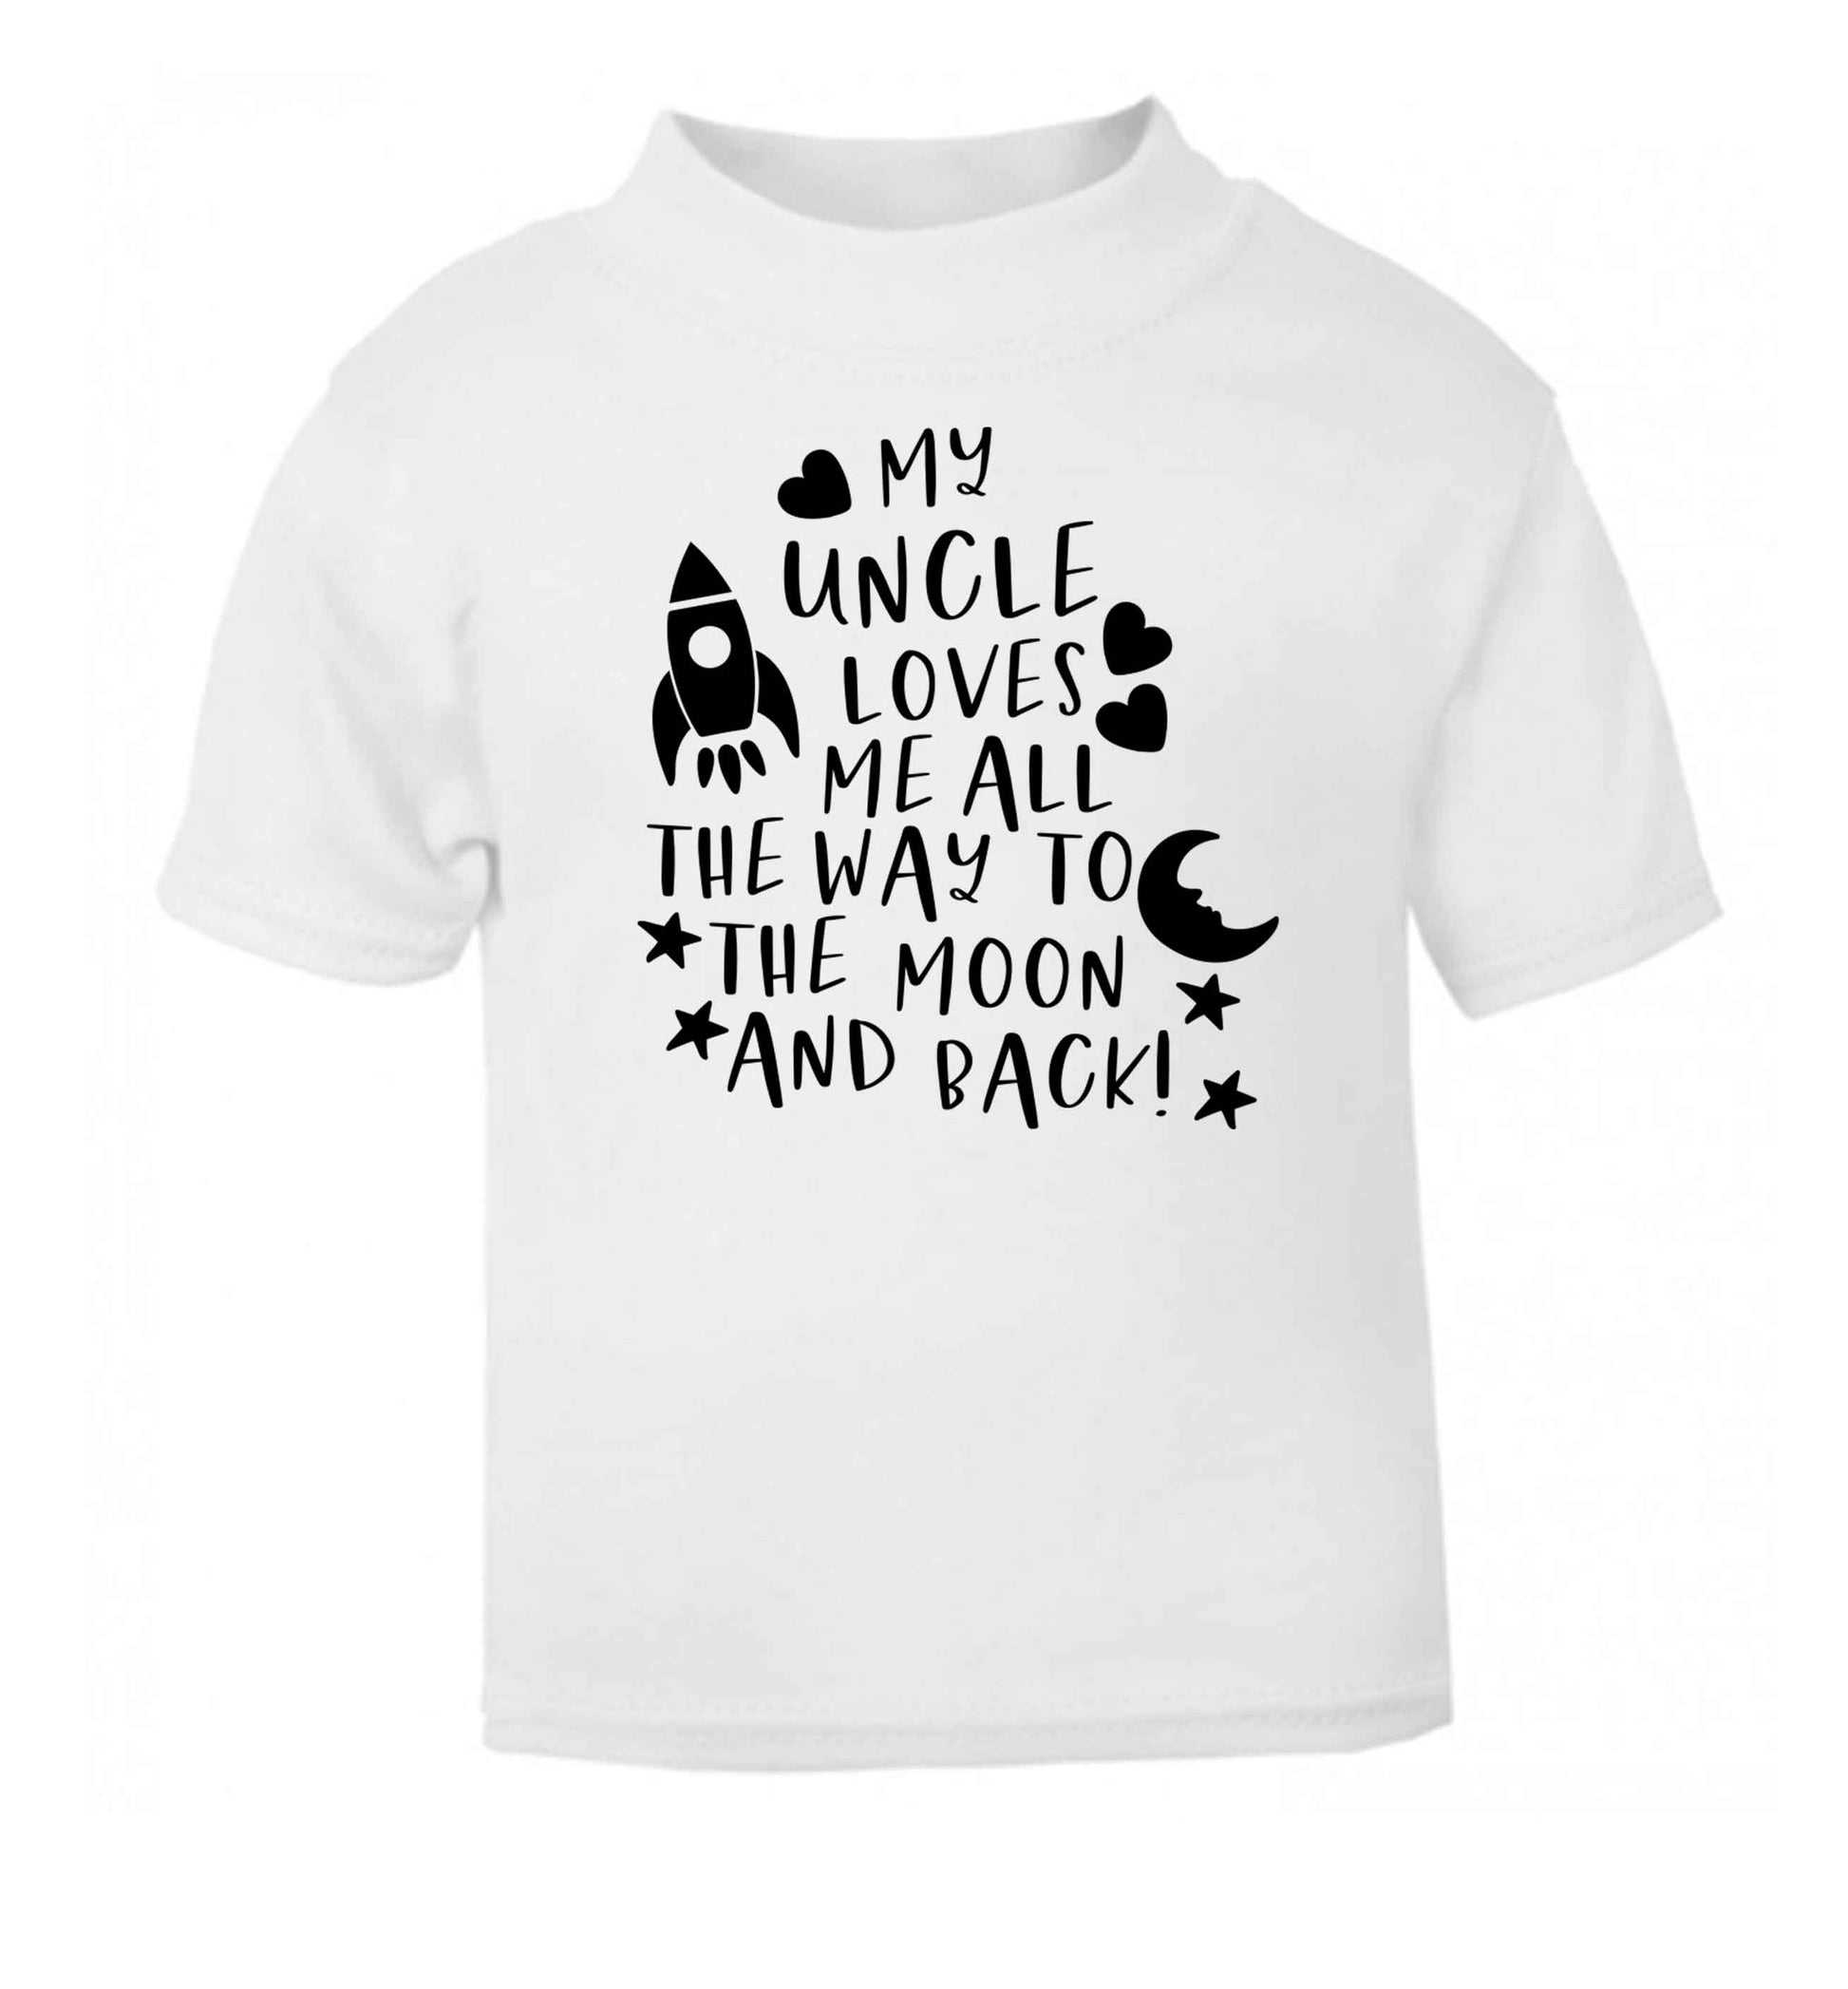 My uncle loves me all the way to the moon and back white Baby Toddler Tshirt 2 Years